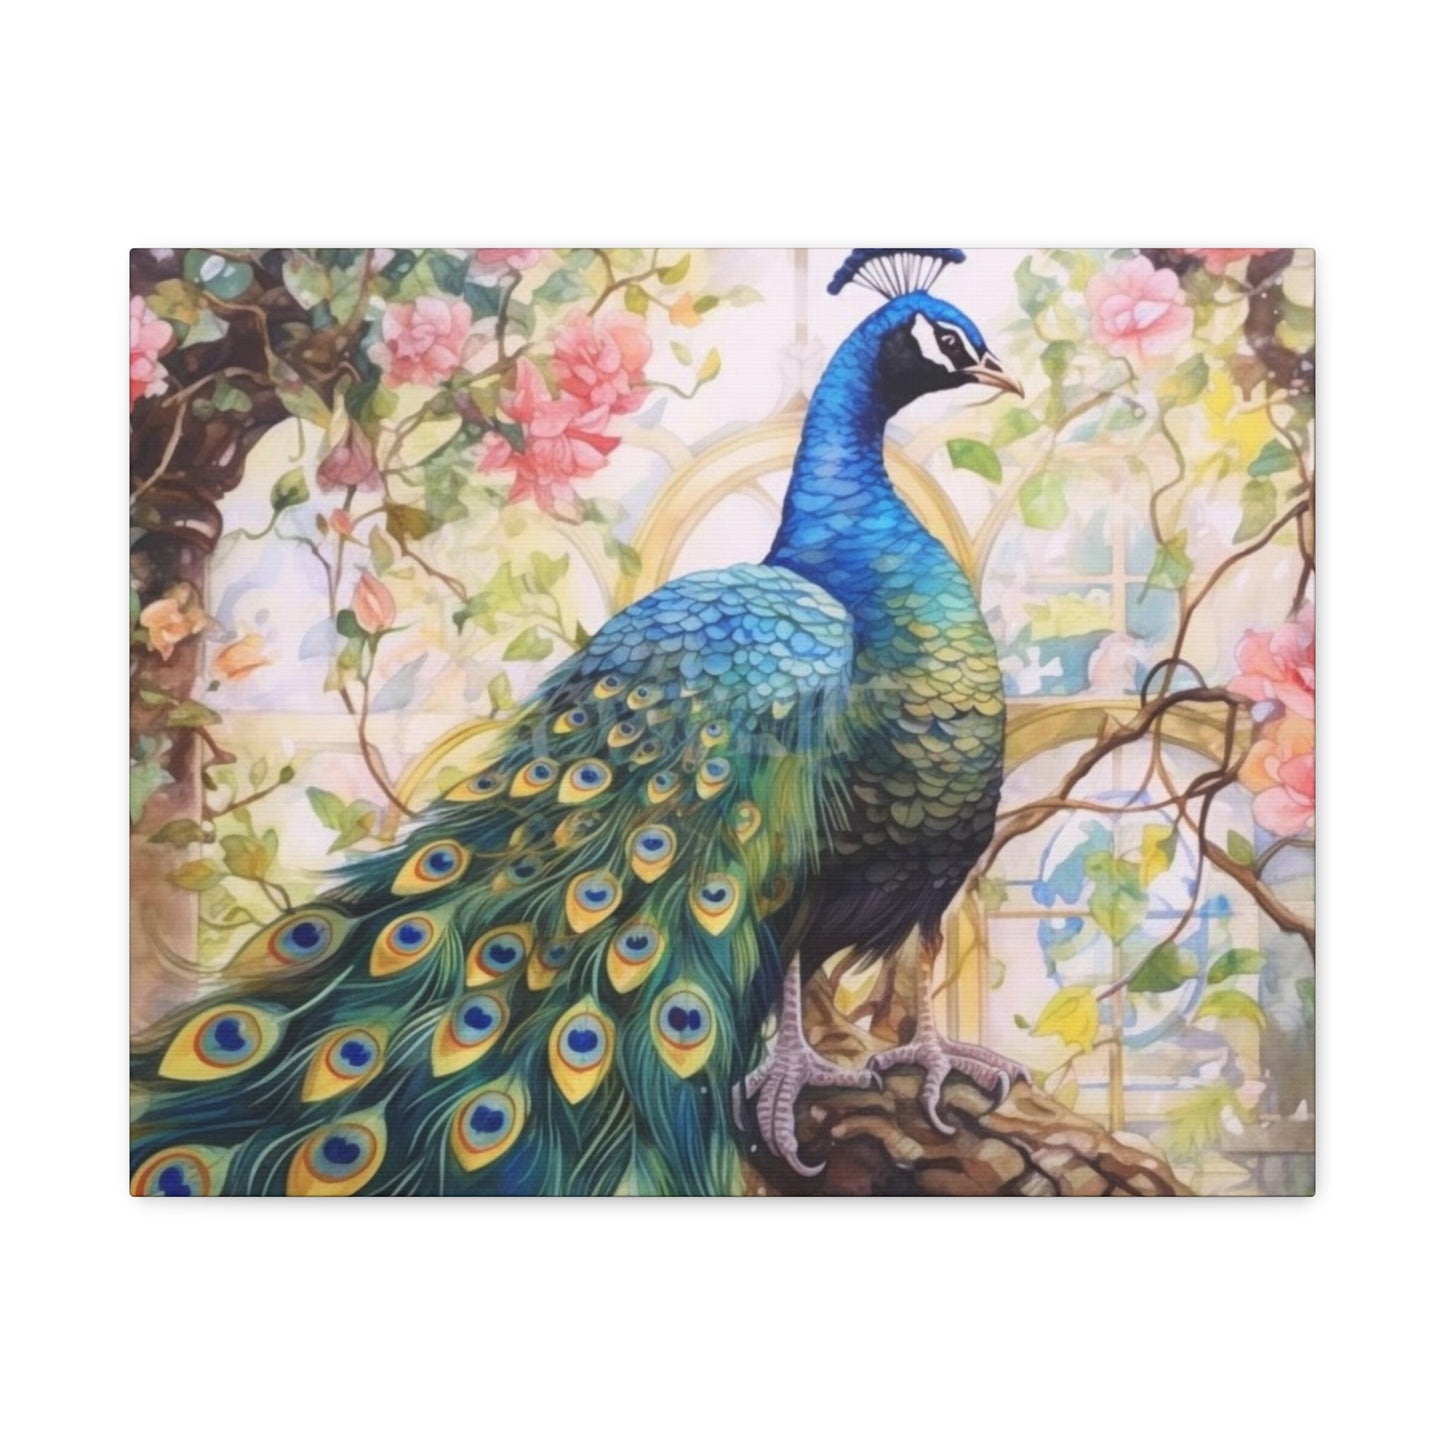 Peacock Canvas Gallery Wrap, Flowers Floral Watercolor Wall Art Print Decor Small Large Hanging Modern Landscape Living Room Starcove Fashion